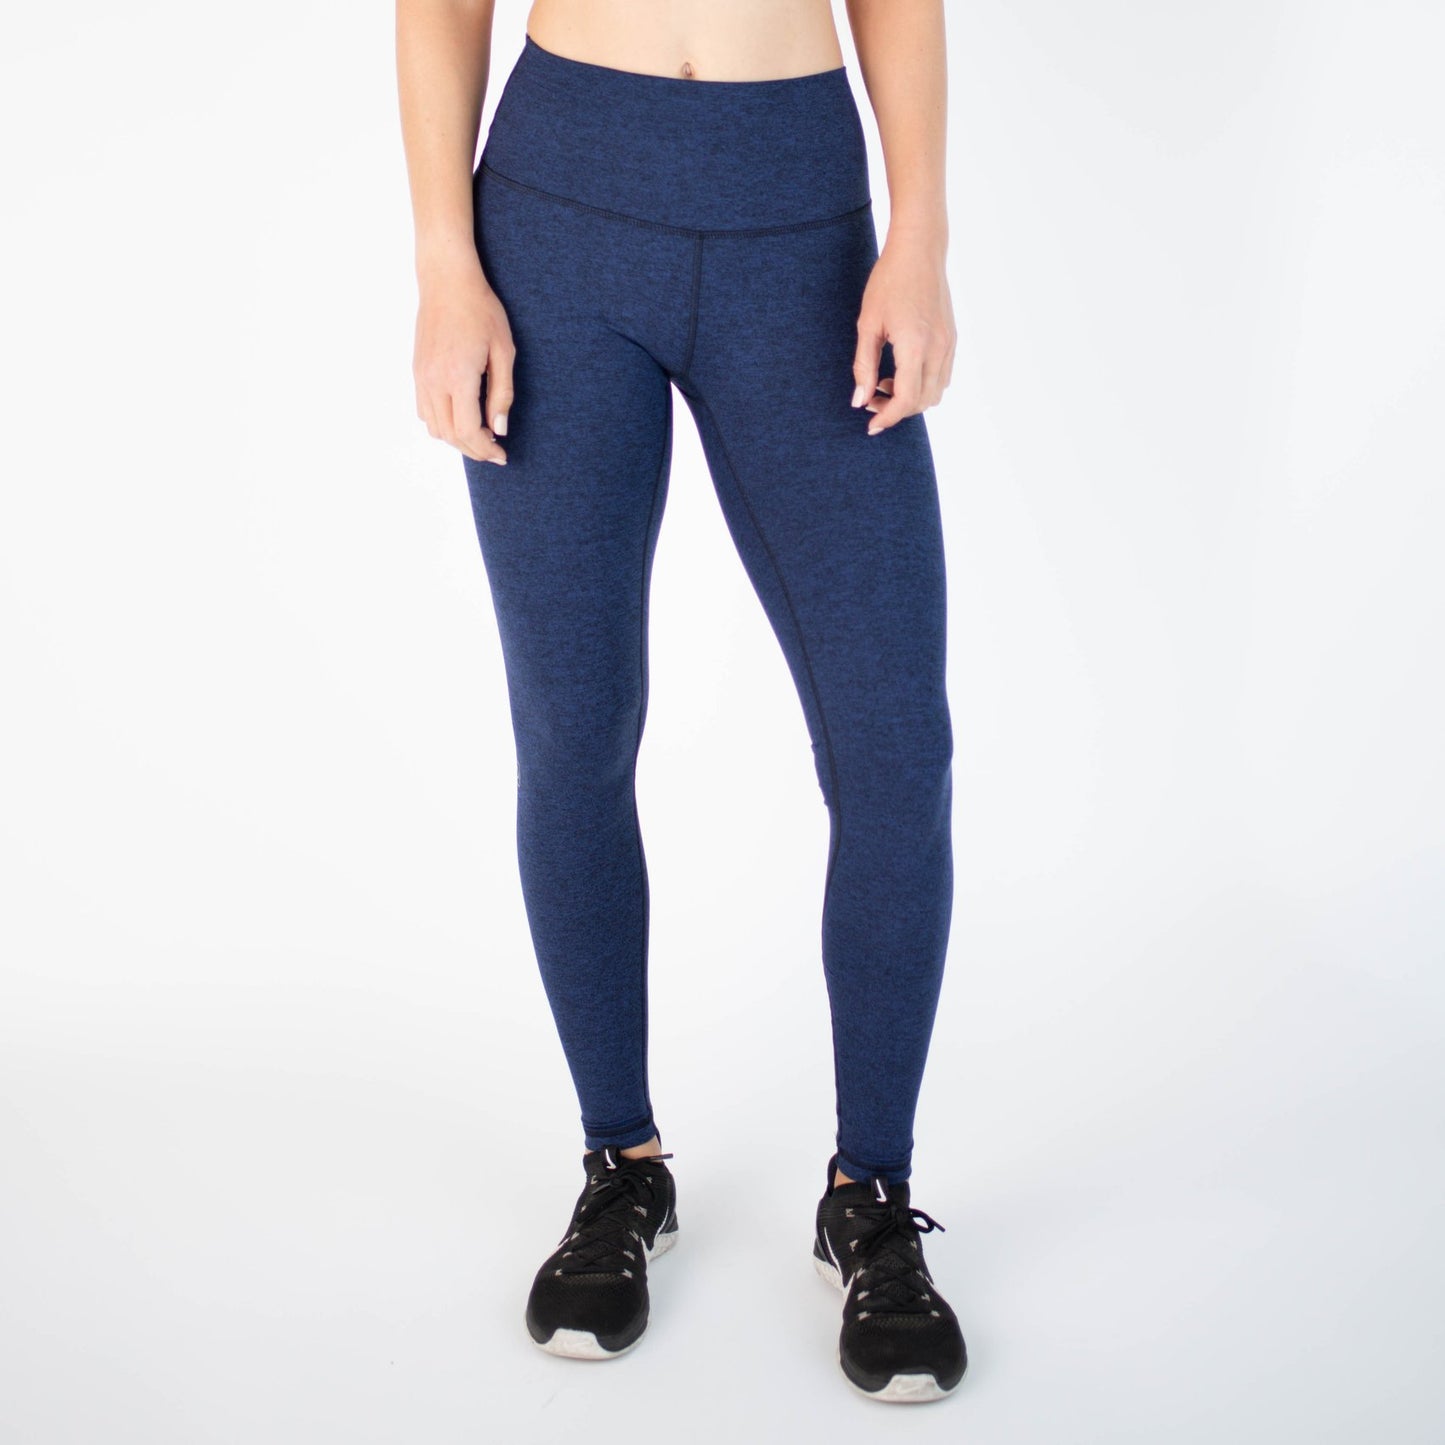 FLEO - Apex 25 Bounce Leggings – These Fists Fly